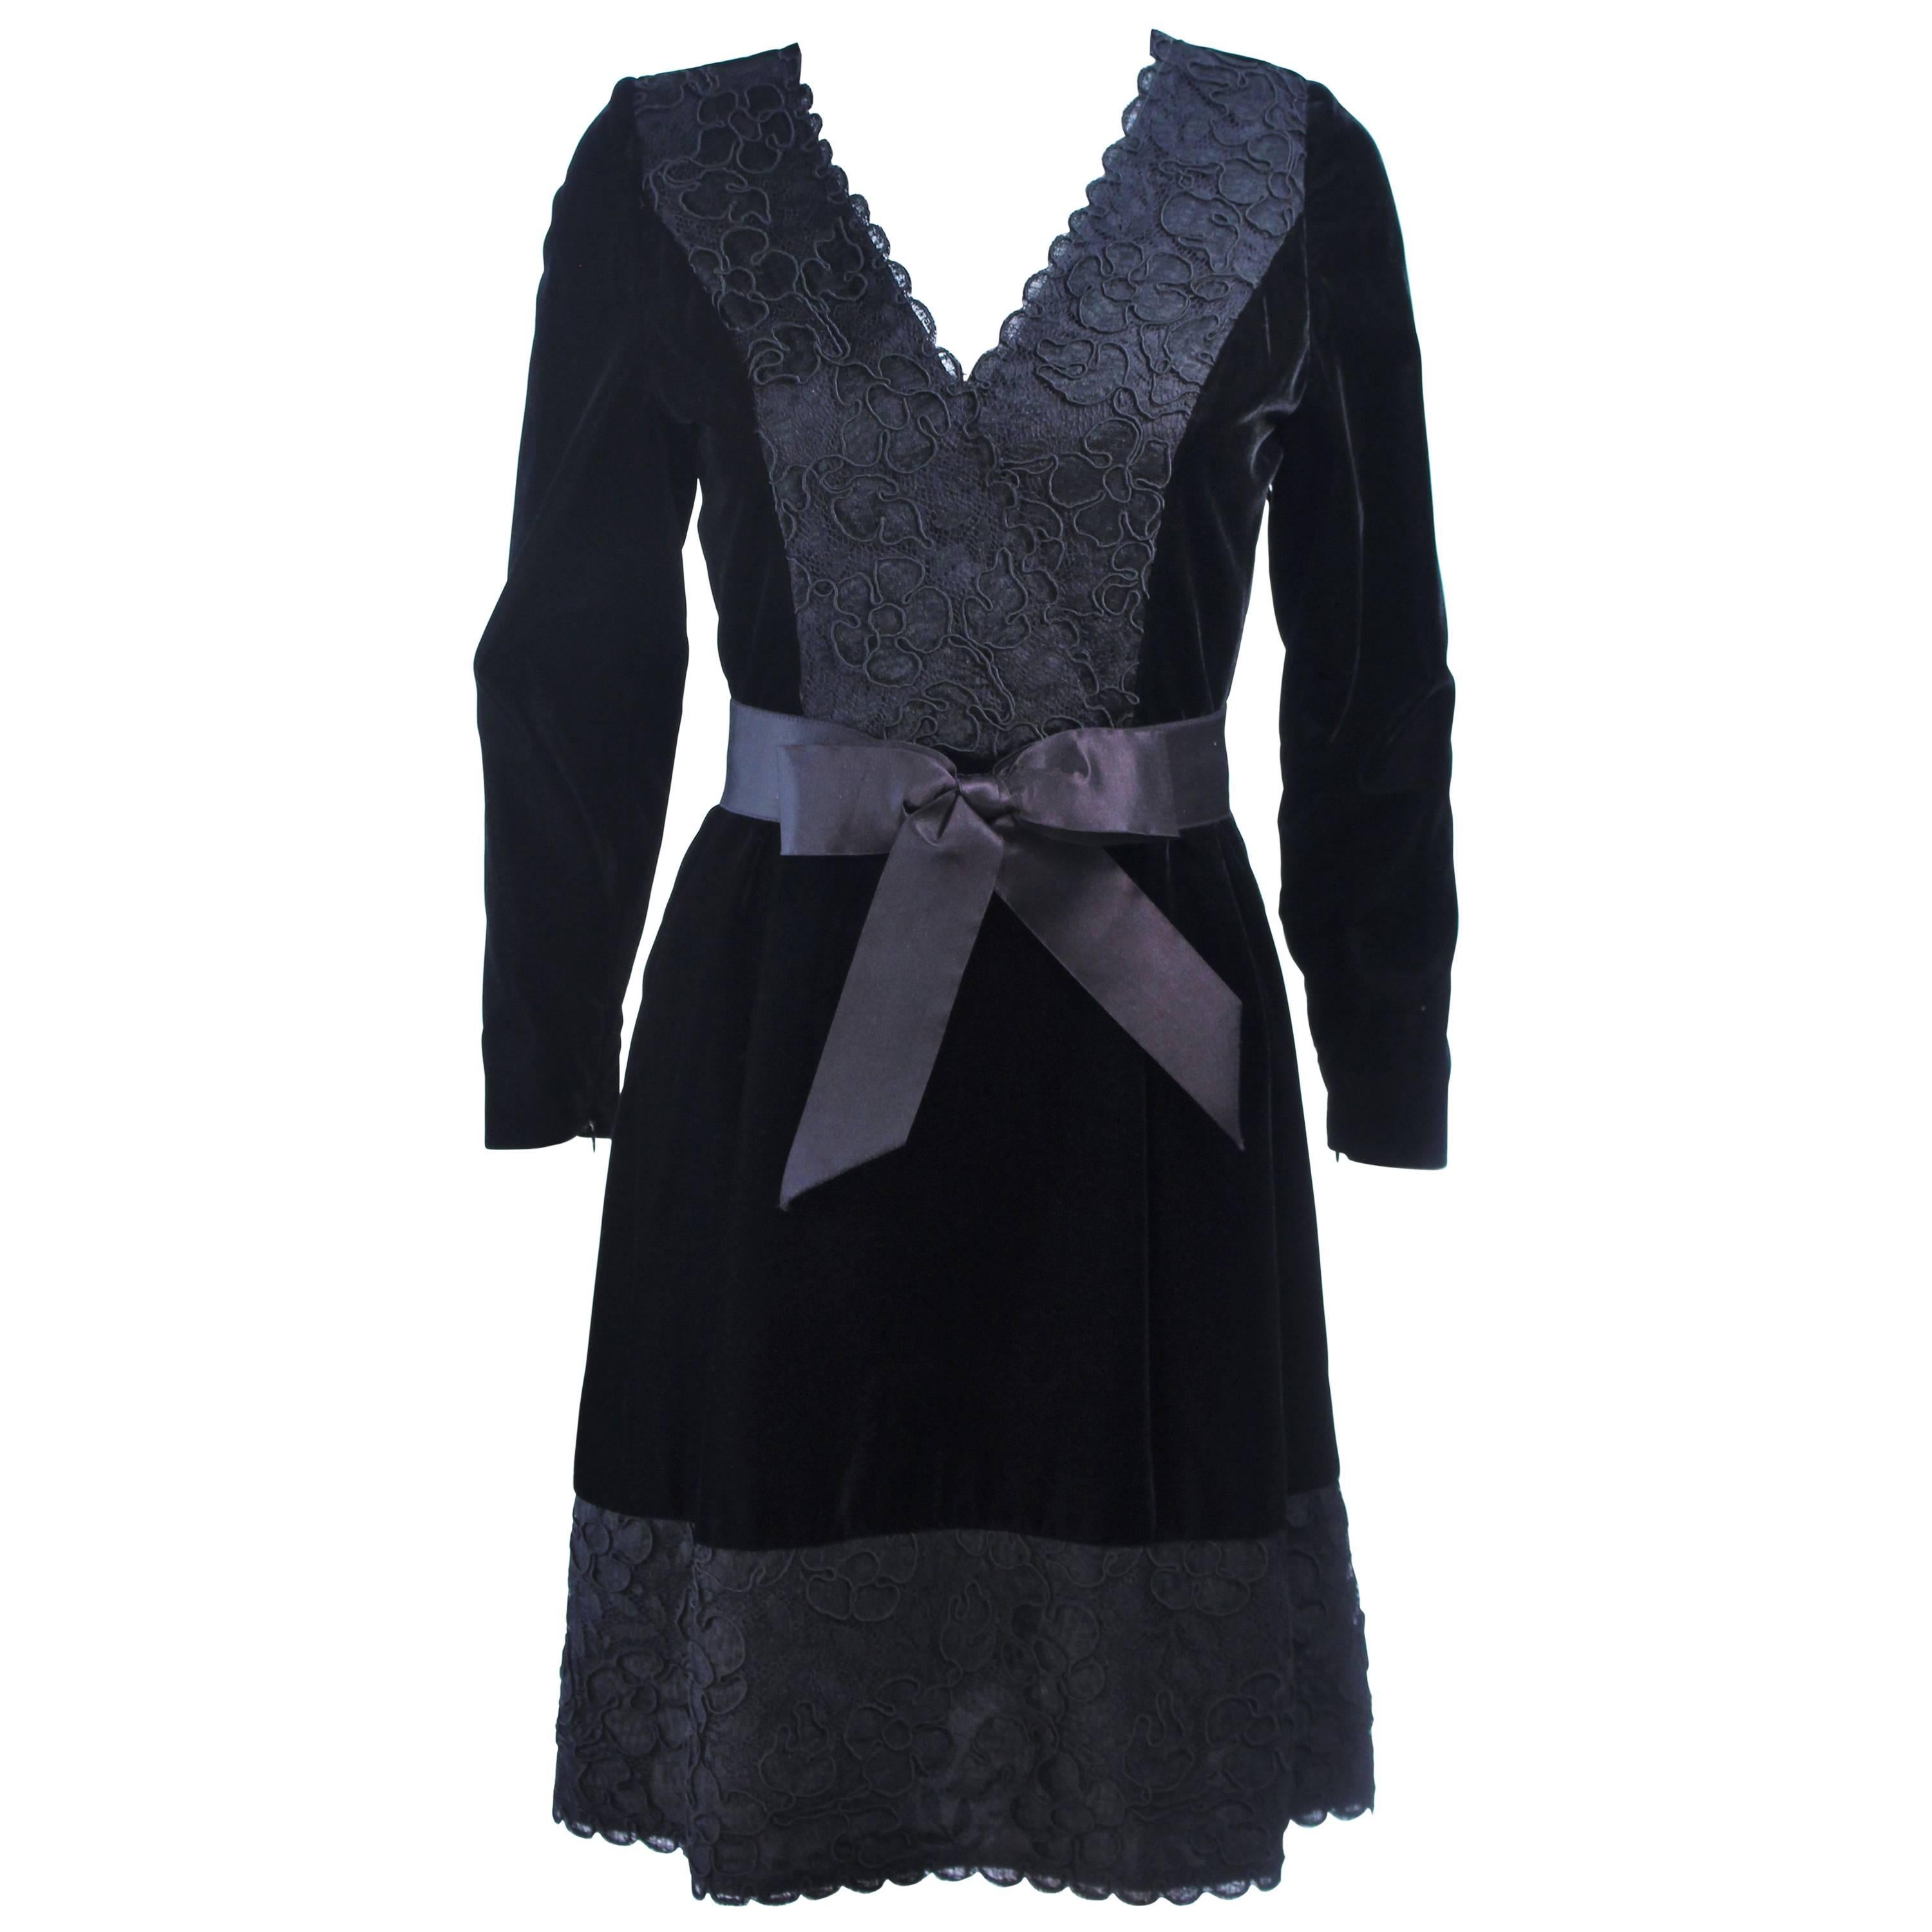 GIVENCHY Black Velvet Cocktail Dress with Lace Trim and Satin Belt Size 4 For Sale